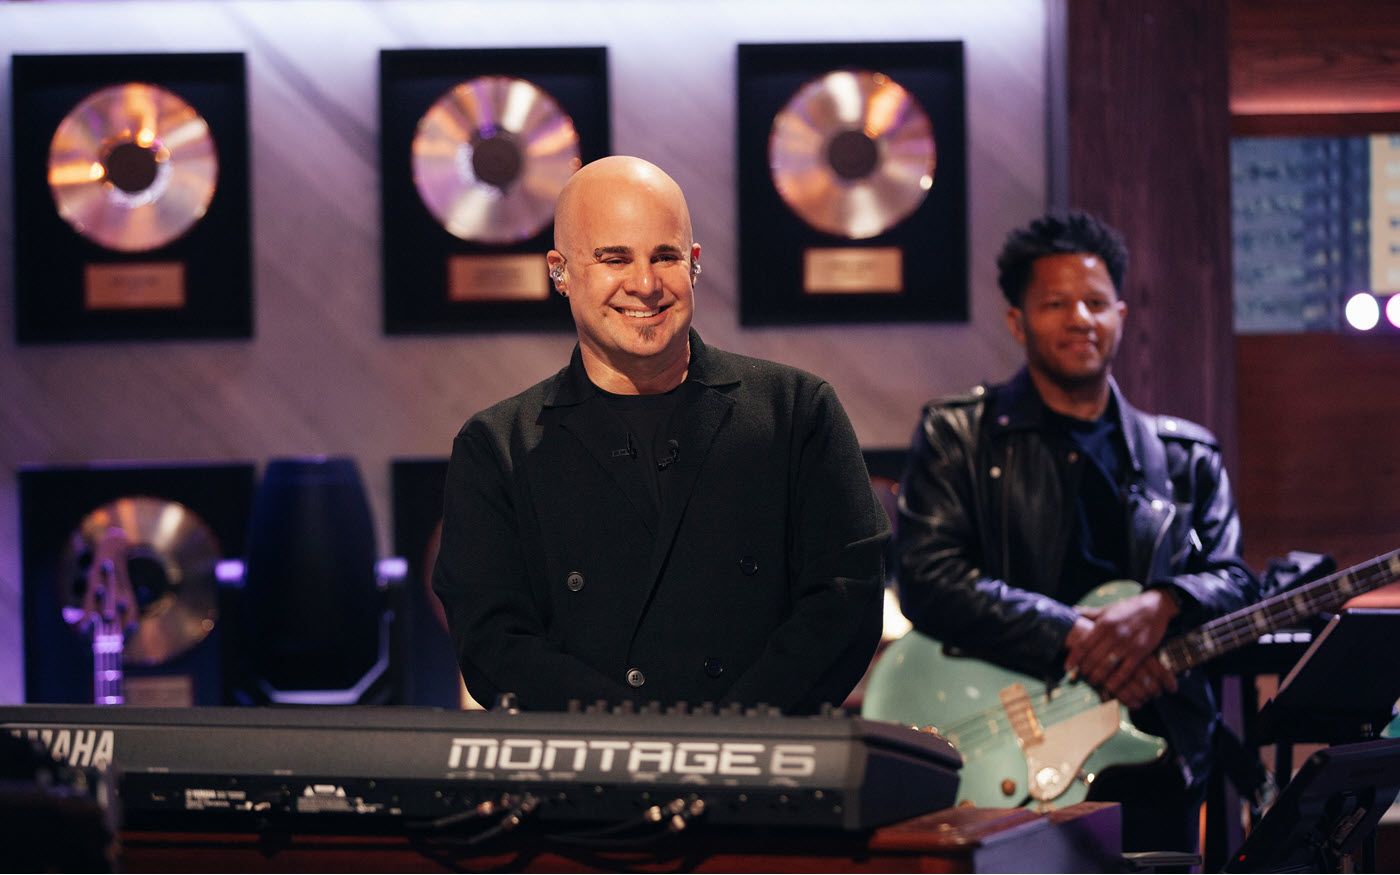 Attractive bald male musician with a guitarist in the background an a wall of framed gold albums smiles for camera.